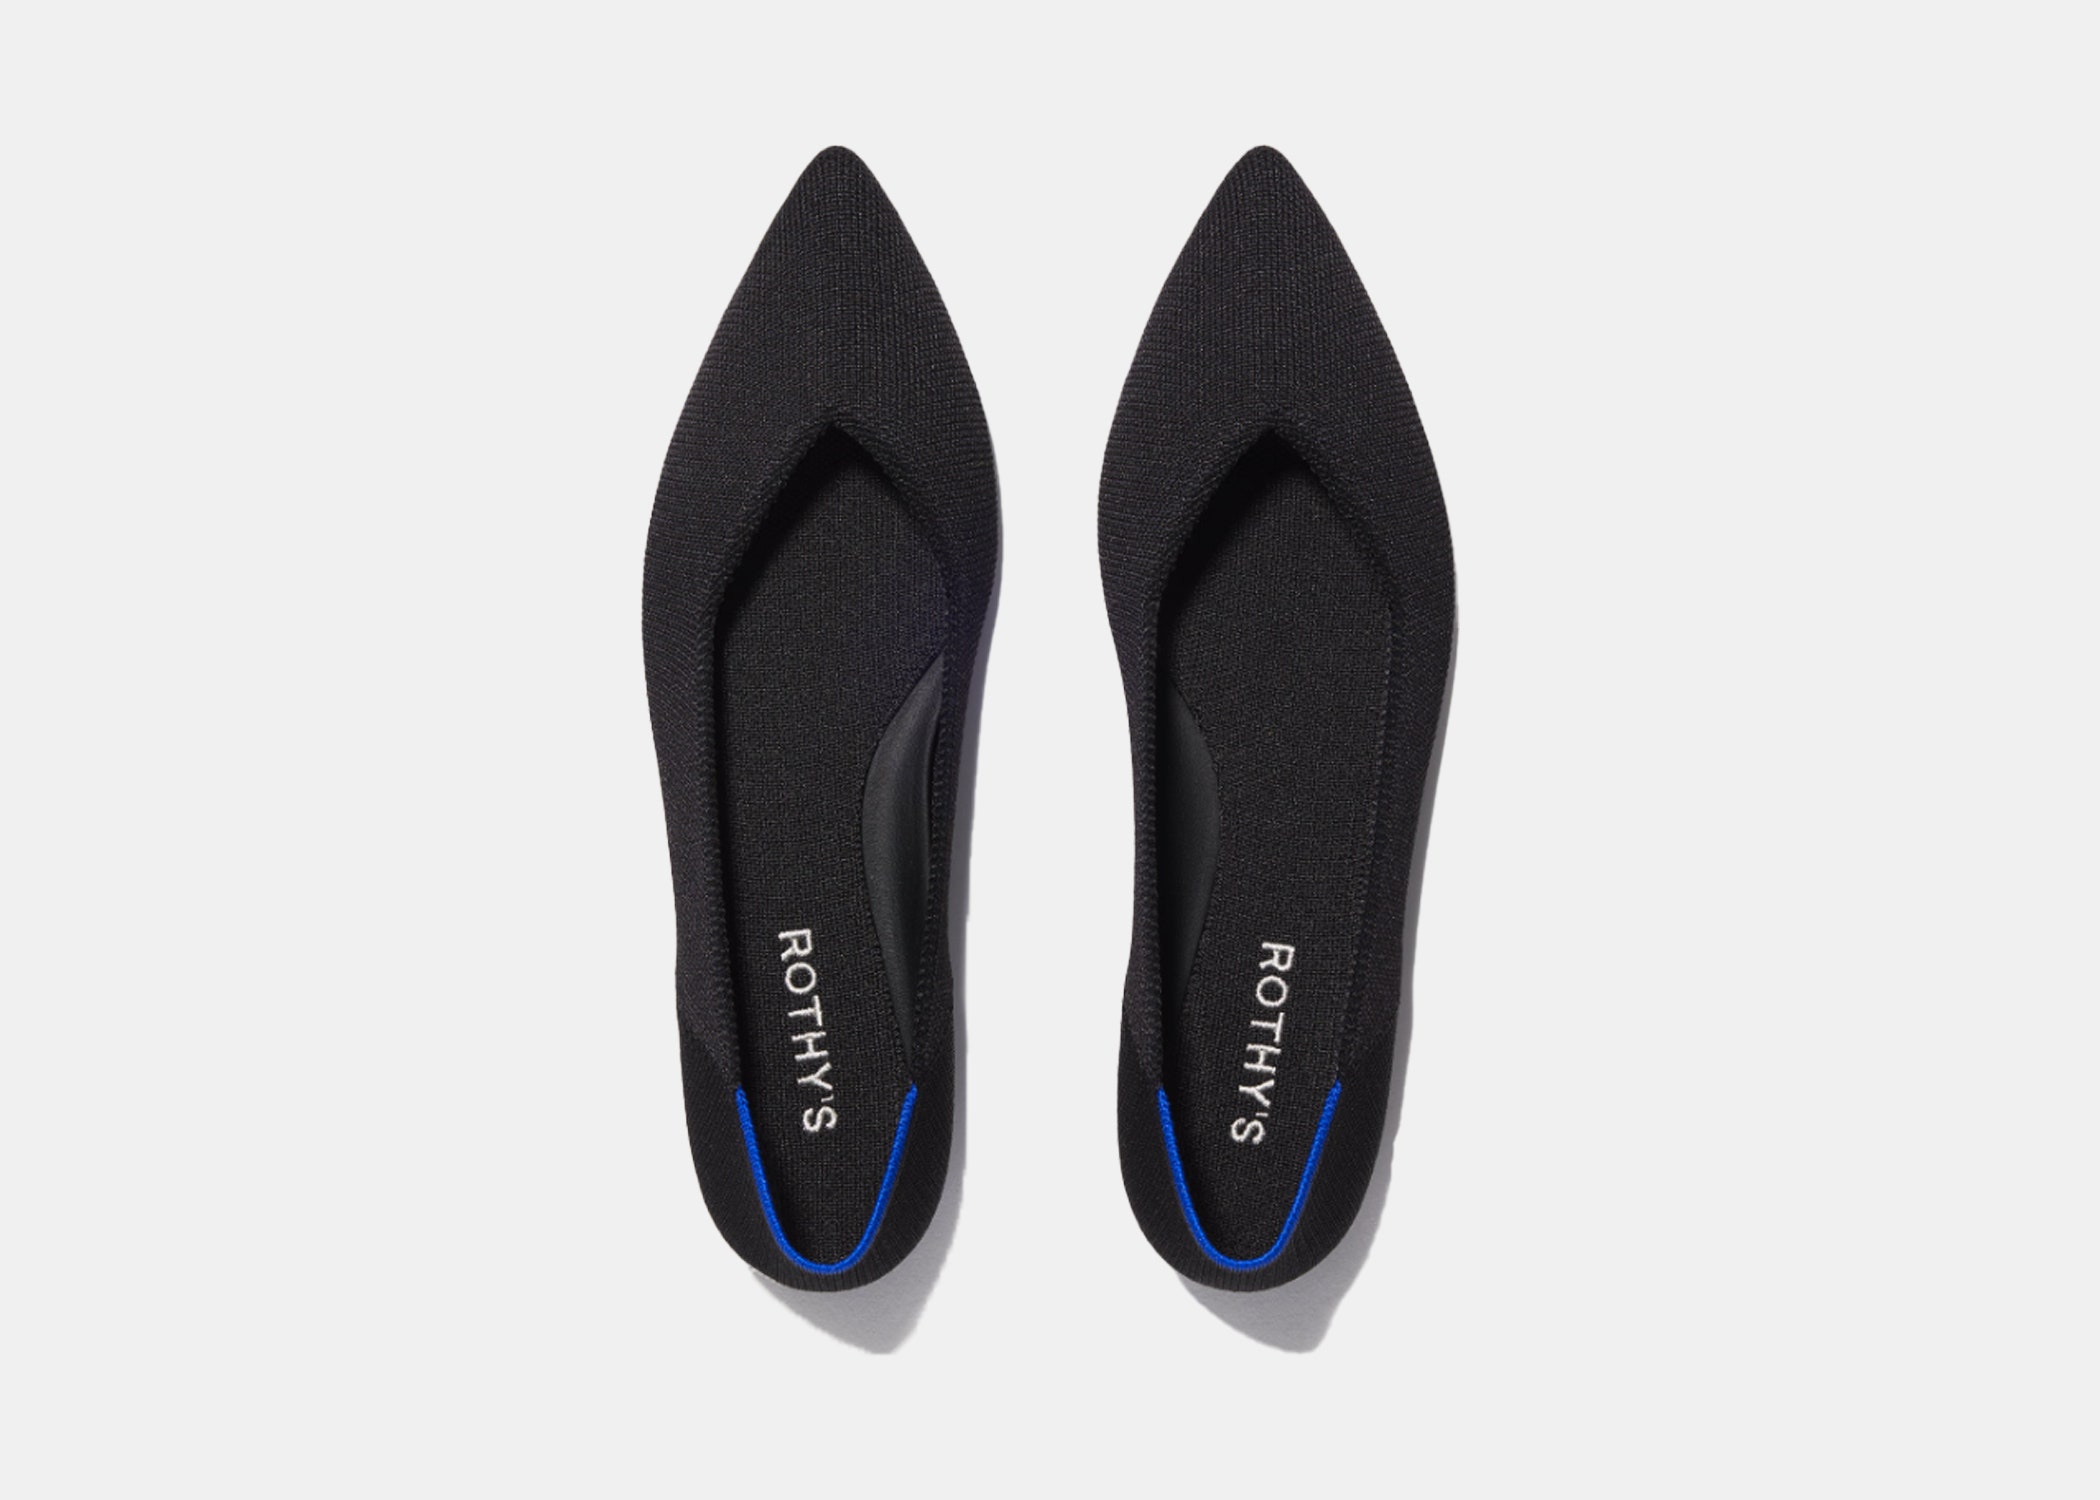 Refresh your all-black travel day look with the new and improved flats from Rothy’s. The bestselling Point II shoe has been updated with a more spacious toe box, added elastic, thicker insoles, and arch support. The <a href="https://cna.st/affiliate-link/AF4hZrJoZxC7ra9unUoFu2AHBKXFpzWUstfUgWFto4kRVAeZiPMLjMRHVugFaW49ozGhXQp7aBQ4pddmS4ekbijiH3CwsSpymCs5Ar4diL5STCKG2Ru8vVqEDq2UUWL7ybpWCJ6Ppy2WguyBCcS8RtiPB" rel="sponsored">original Point</a> <em>is</em> still available and both versions have the option of bolds, neutrals, and prints. $155, Rothy's. <a href="https://rothys.com/products/womens-pointed-toe-flat-black#wnkd">Get it now!</a><p>Sign up to receive the latest news, expert tips, and inspiration on all things travel</p><a href="https://www.cntraveler.com/newsletter/the-daily?sourceCode=msnsend">Inspire Me</a>